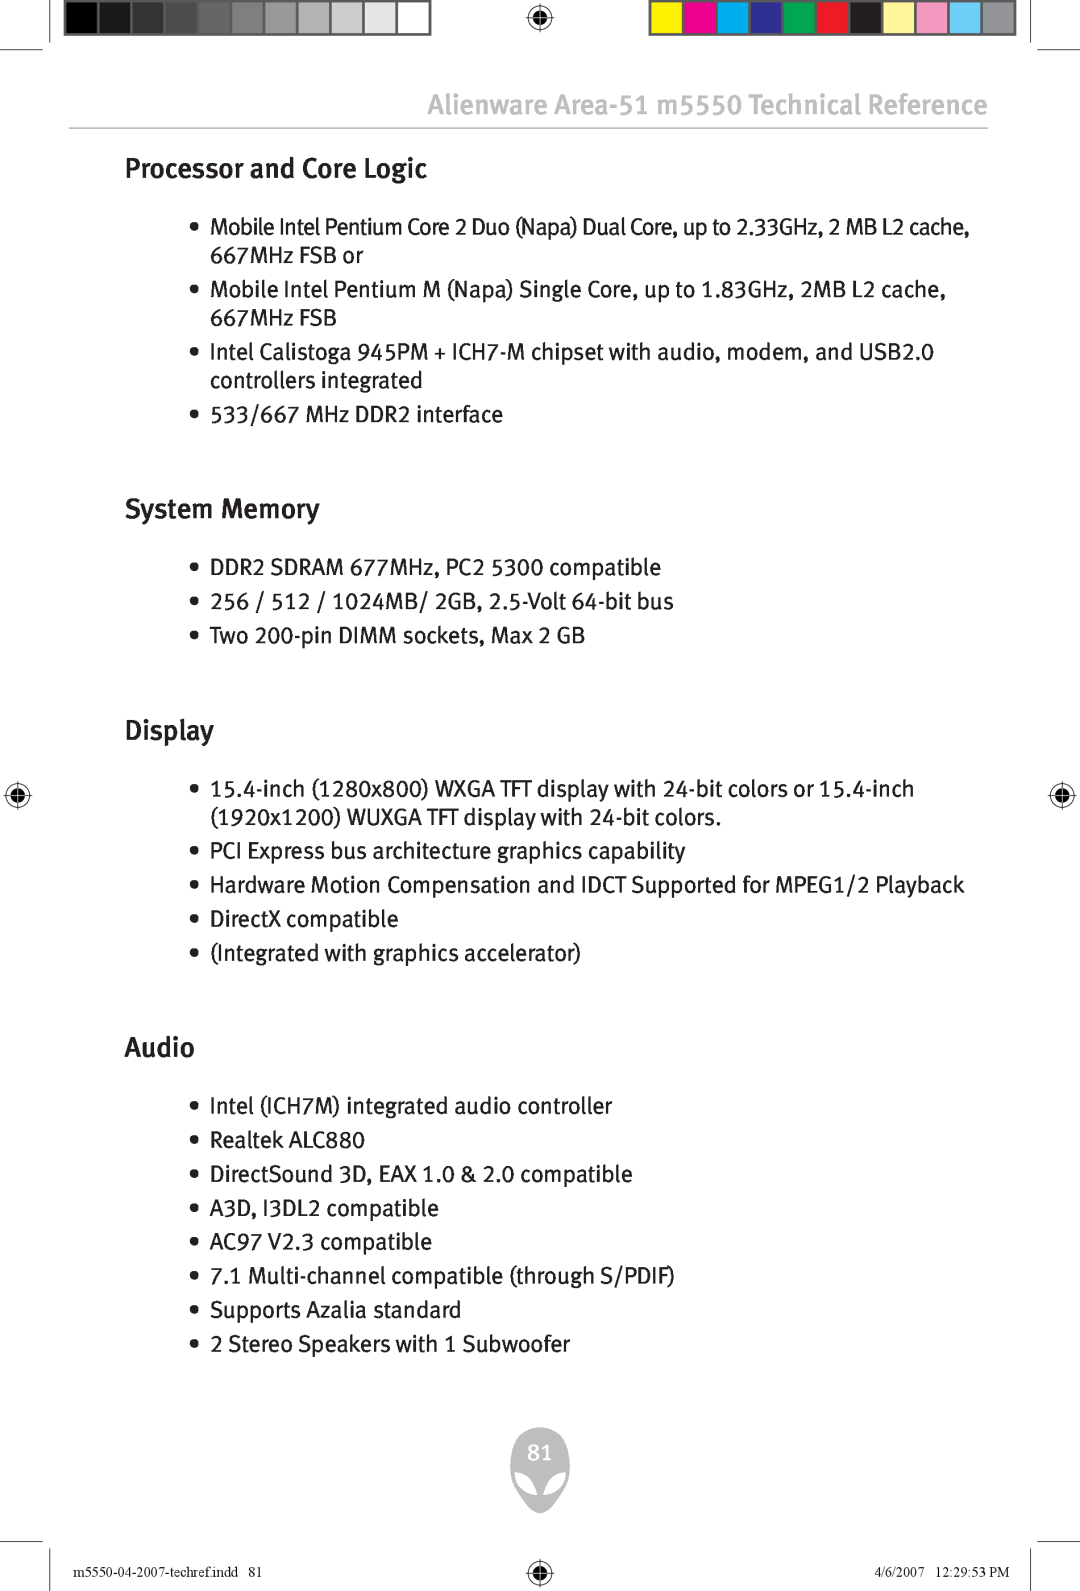 Alienware Processor and Core Logic, System Memory, Display, Audio, Alienware Area-51 m5550 Technical Reference 